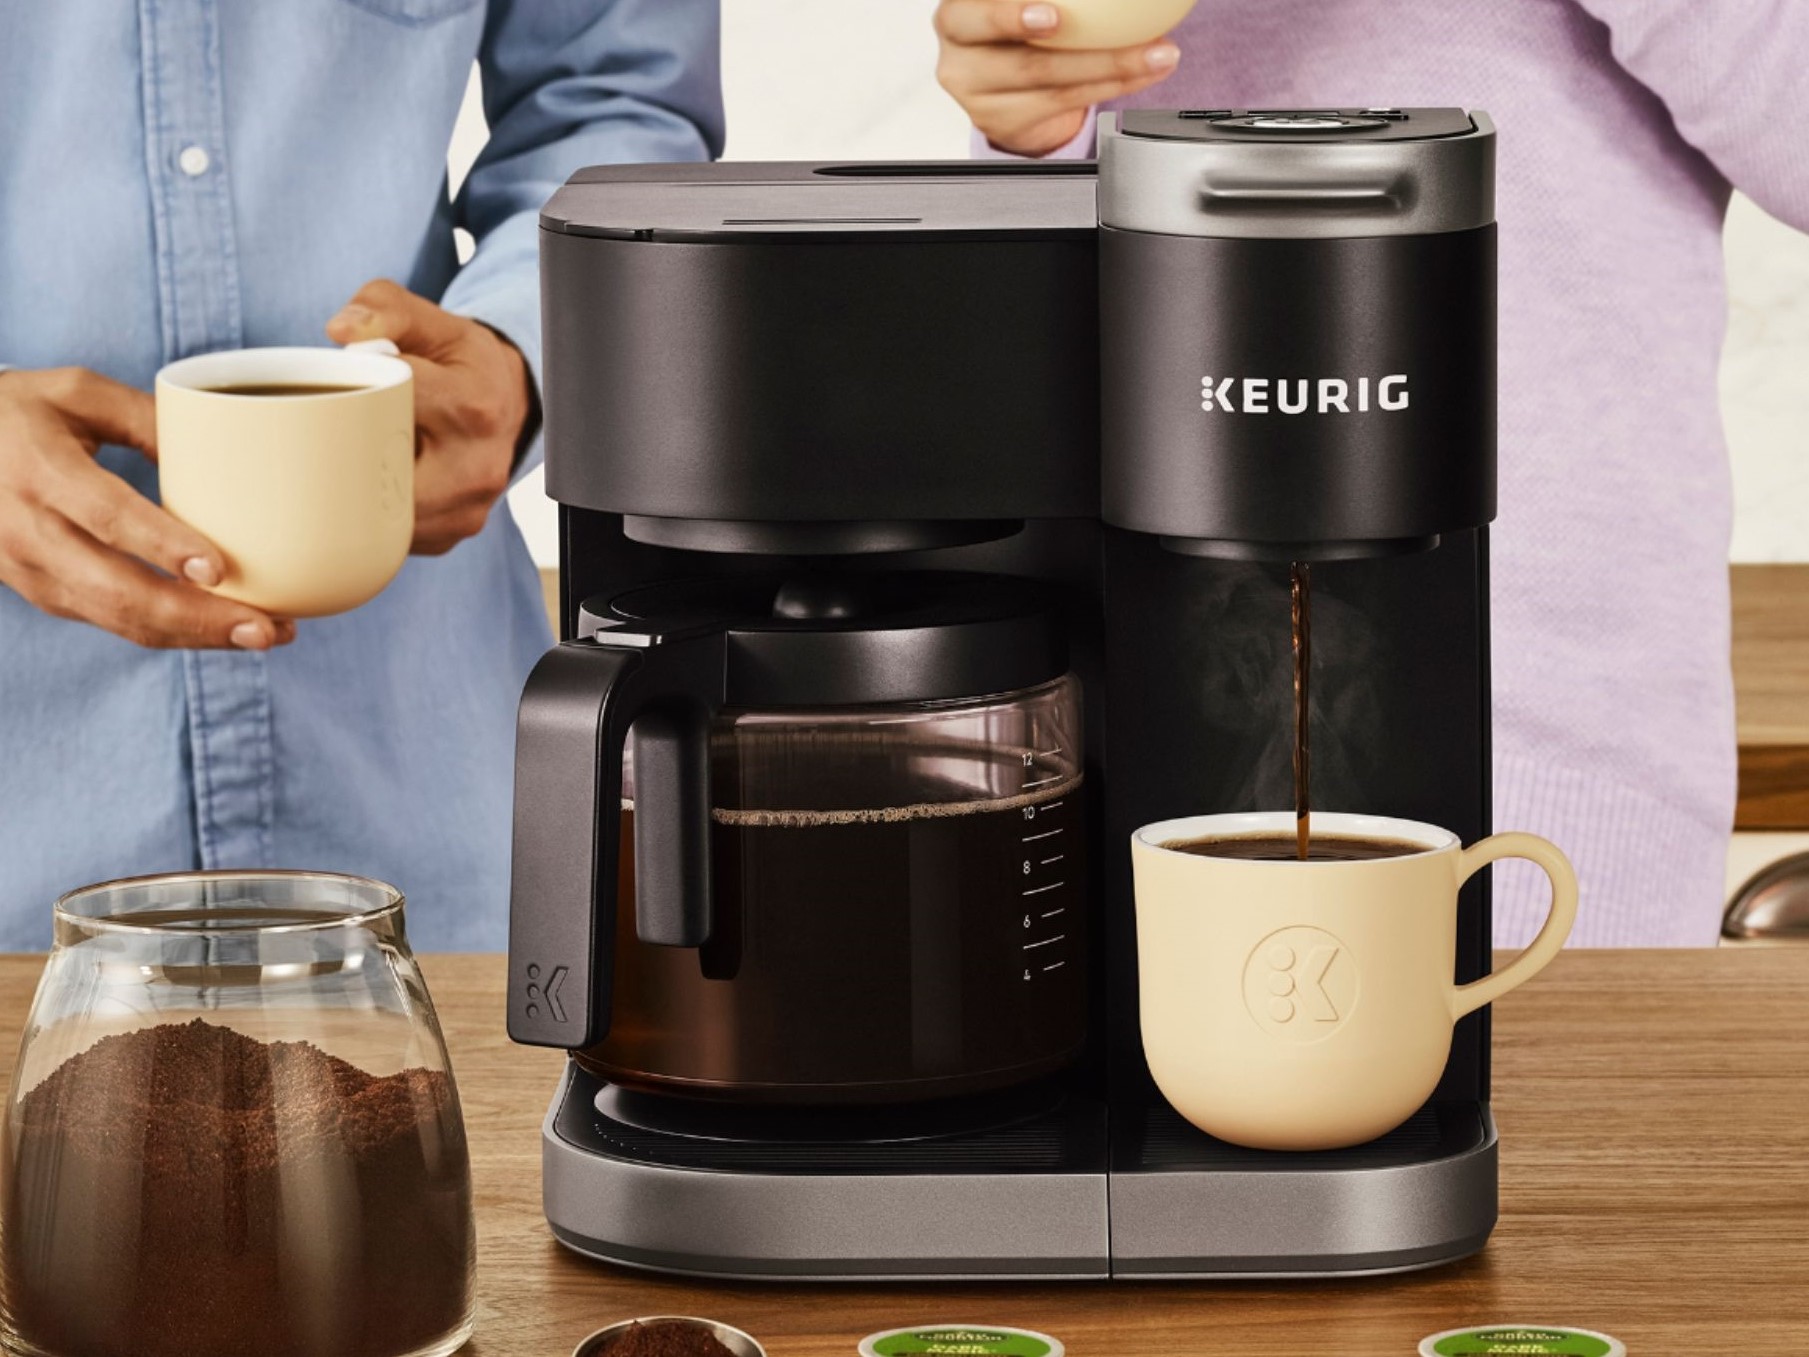 Keurig K-Duo Coffee Maker How To Make A POT OF COFFEE How To Brew Coffee 